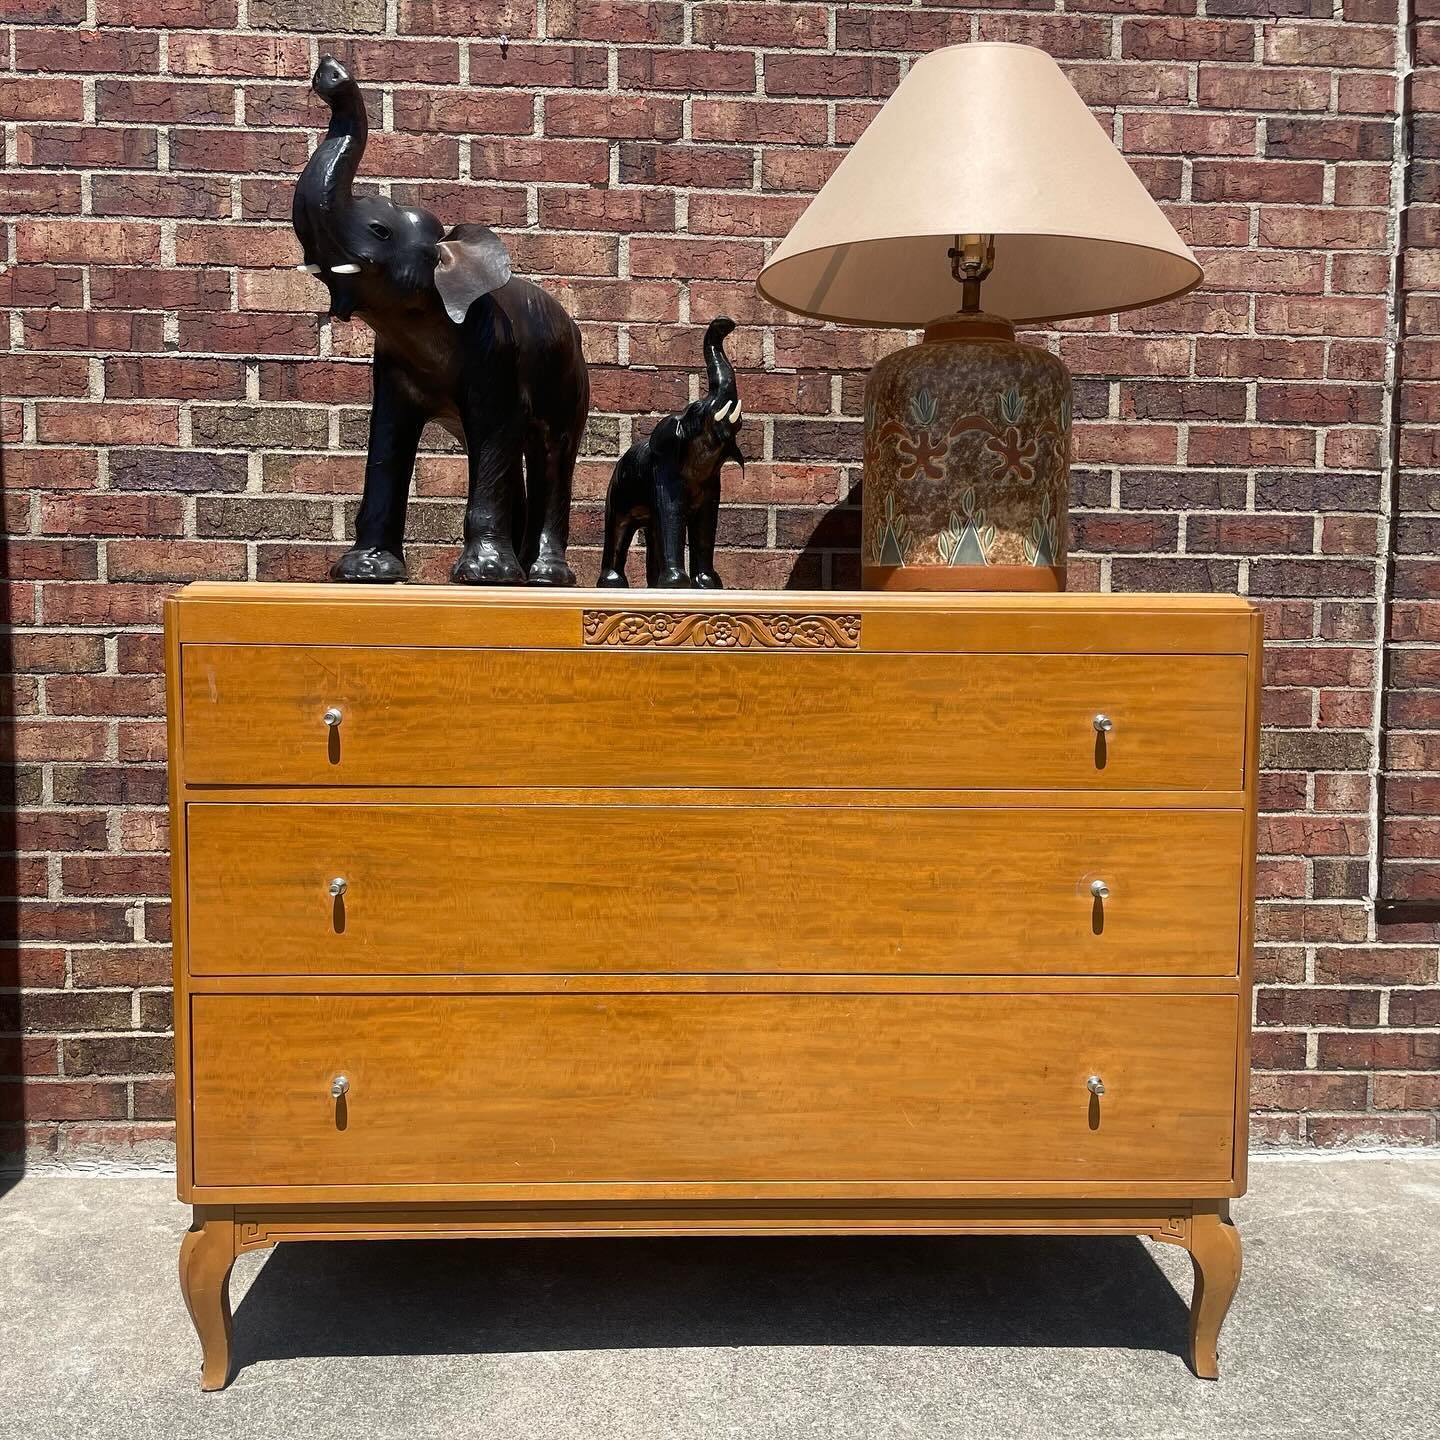 Lovely three drawer wooden chest by Rway with great curvy feet, 36&rdquo; tall 47&rdquo; wide 22&rdquo; deep, $575. 
🐘 Leather wrapped elephants, large 22&rdquo; tall, 19&rdquo; wide, $45 &amp; small, 13&rdquo; tall, 13&rdquo; wide, $30.
💡 Tulip po